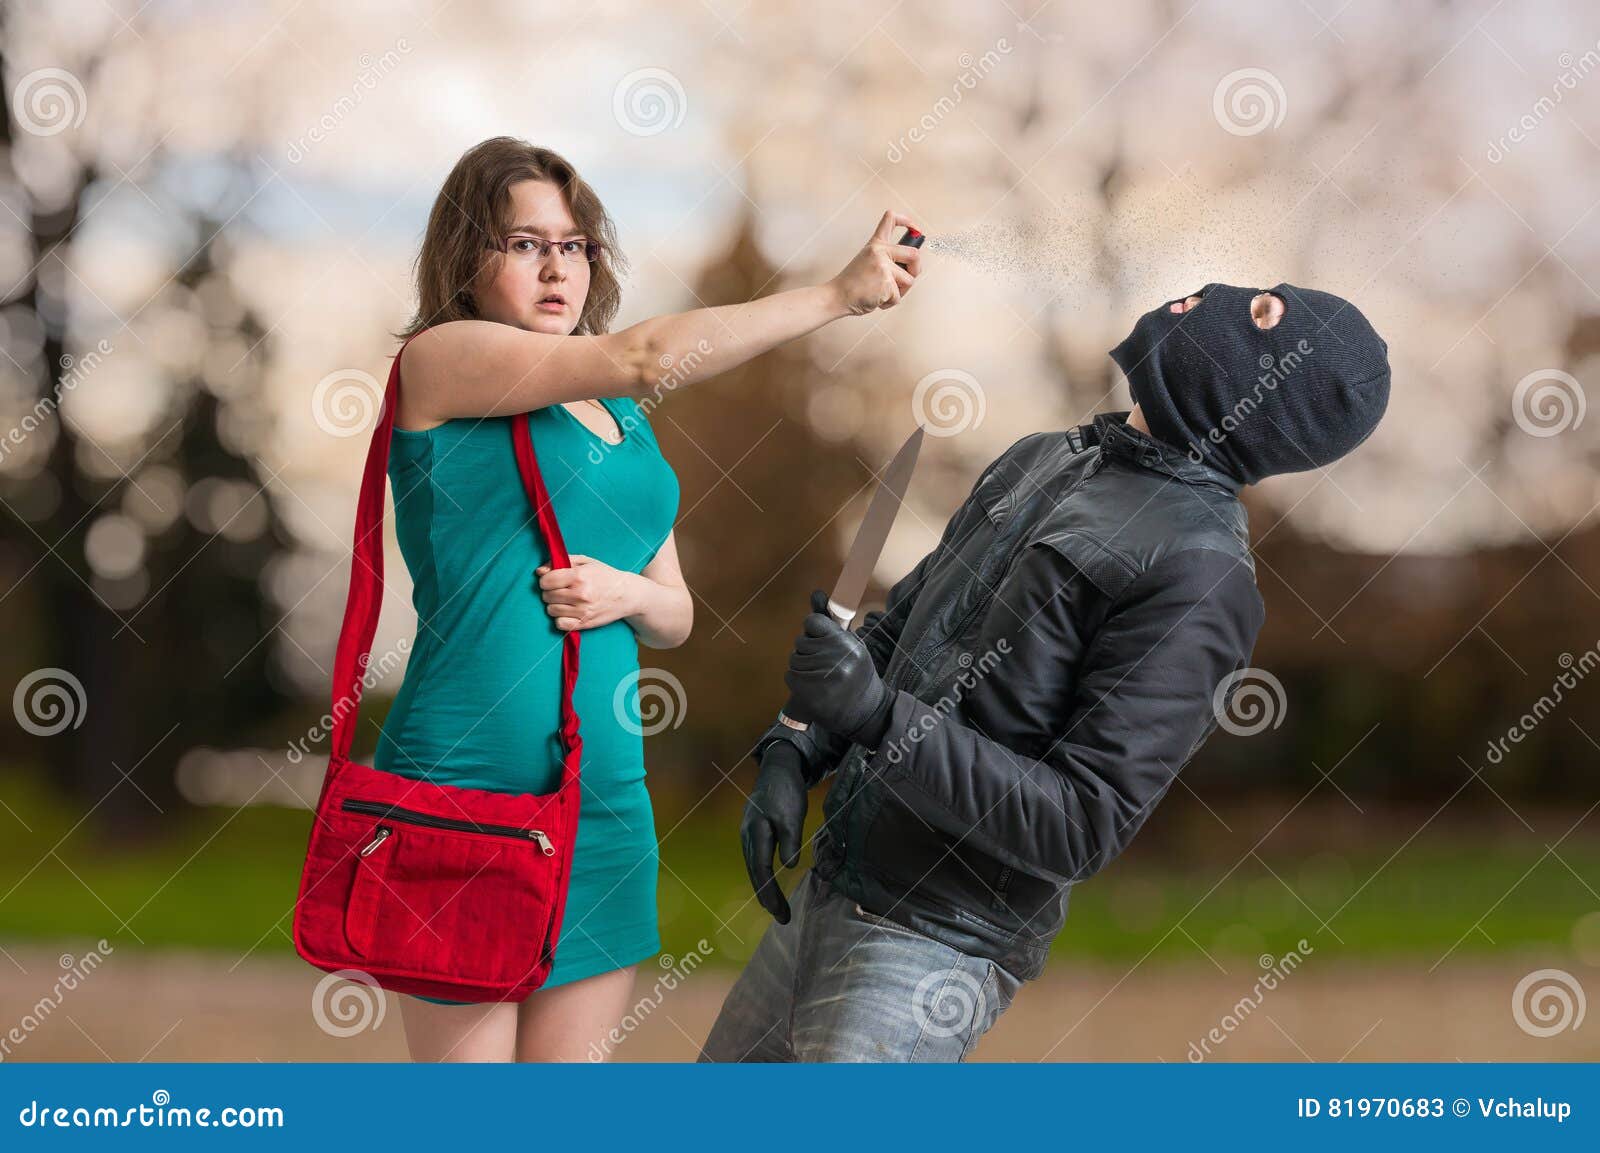 young woman is defending with pepper spray against armed thief.